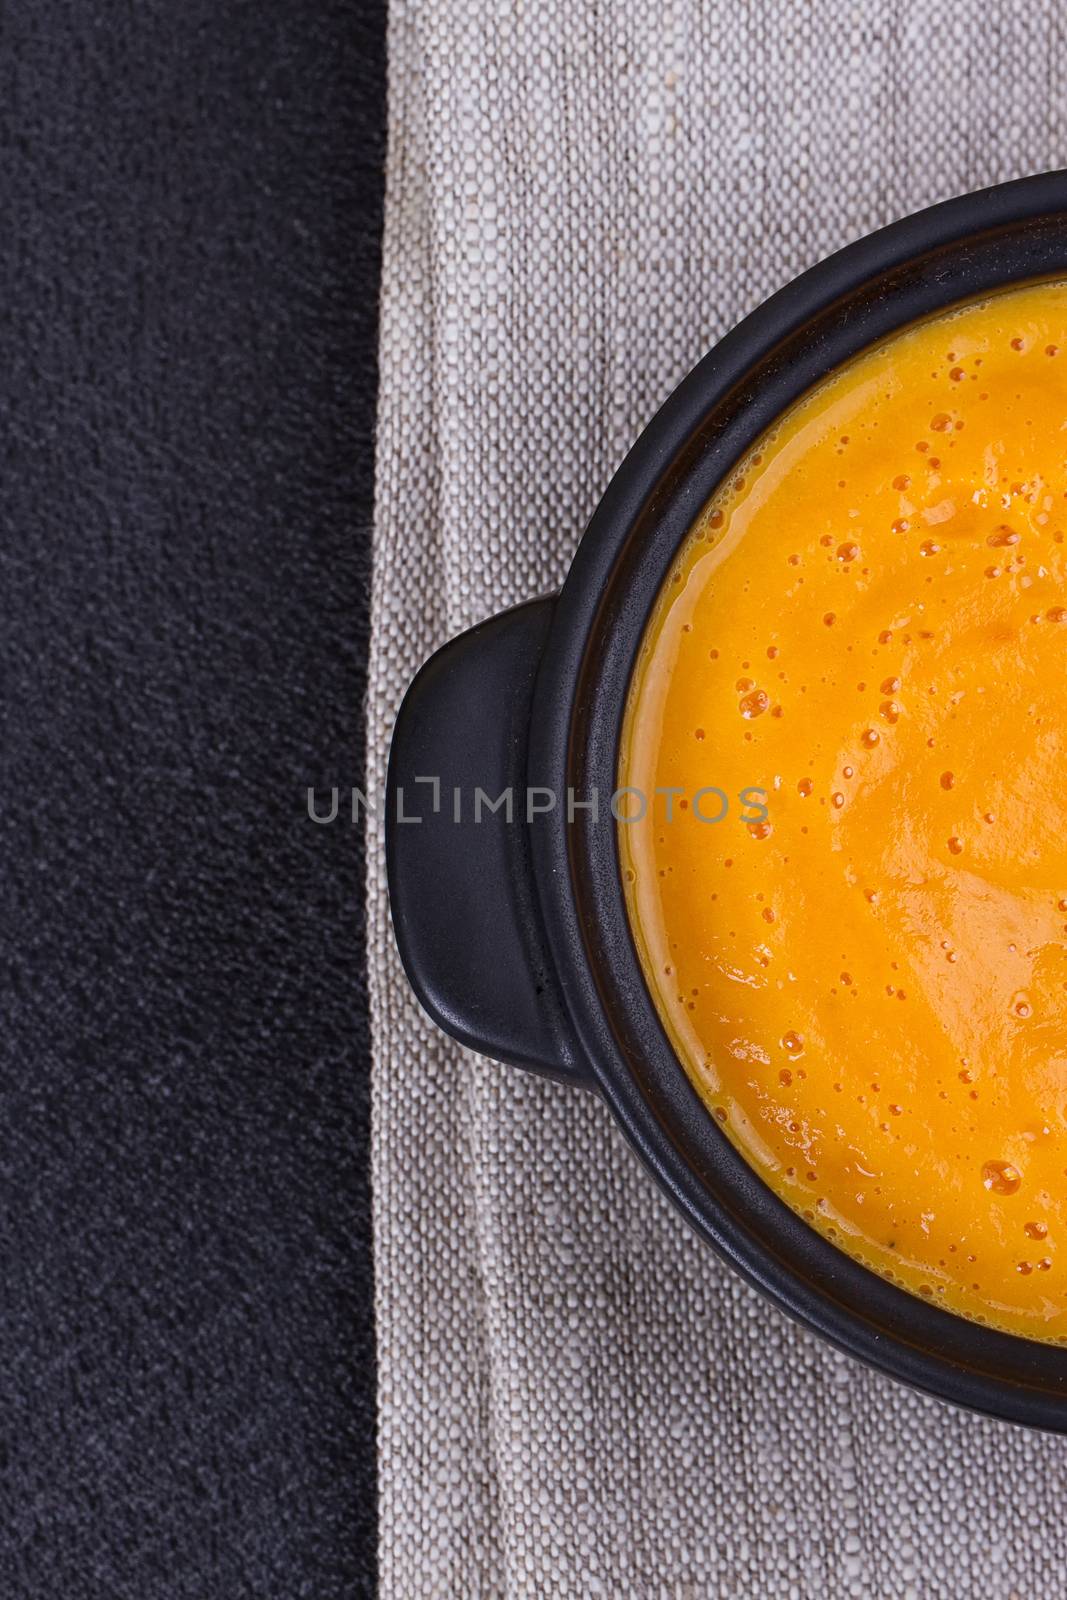 Pumpkin and carrot soup with cream and parsley on dark background